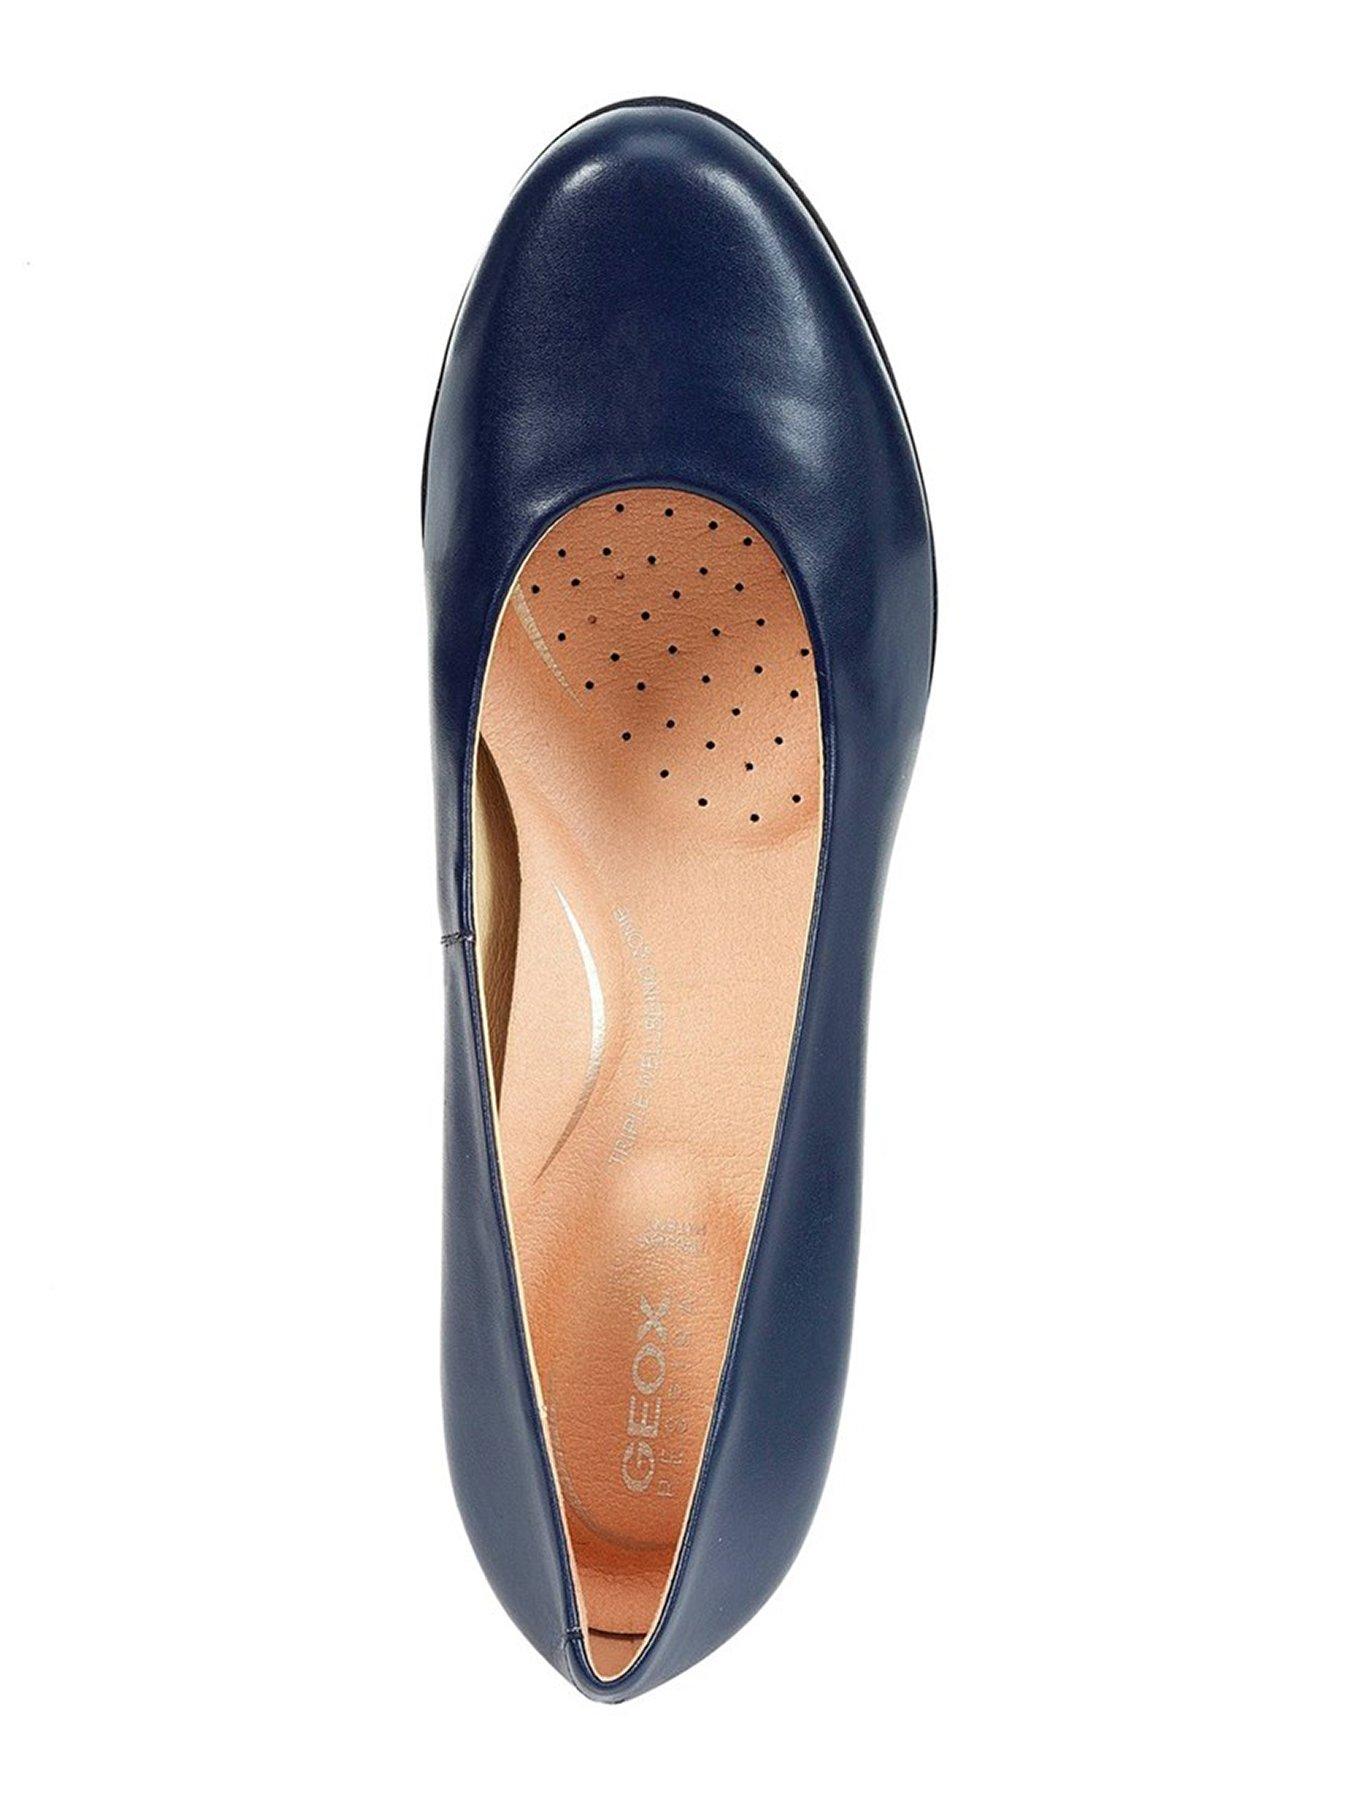 Geox Annya Leather Heeled Shoes - Navy | littlewoods.com